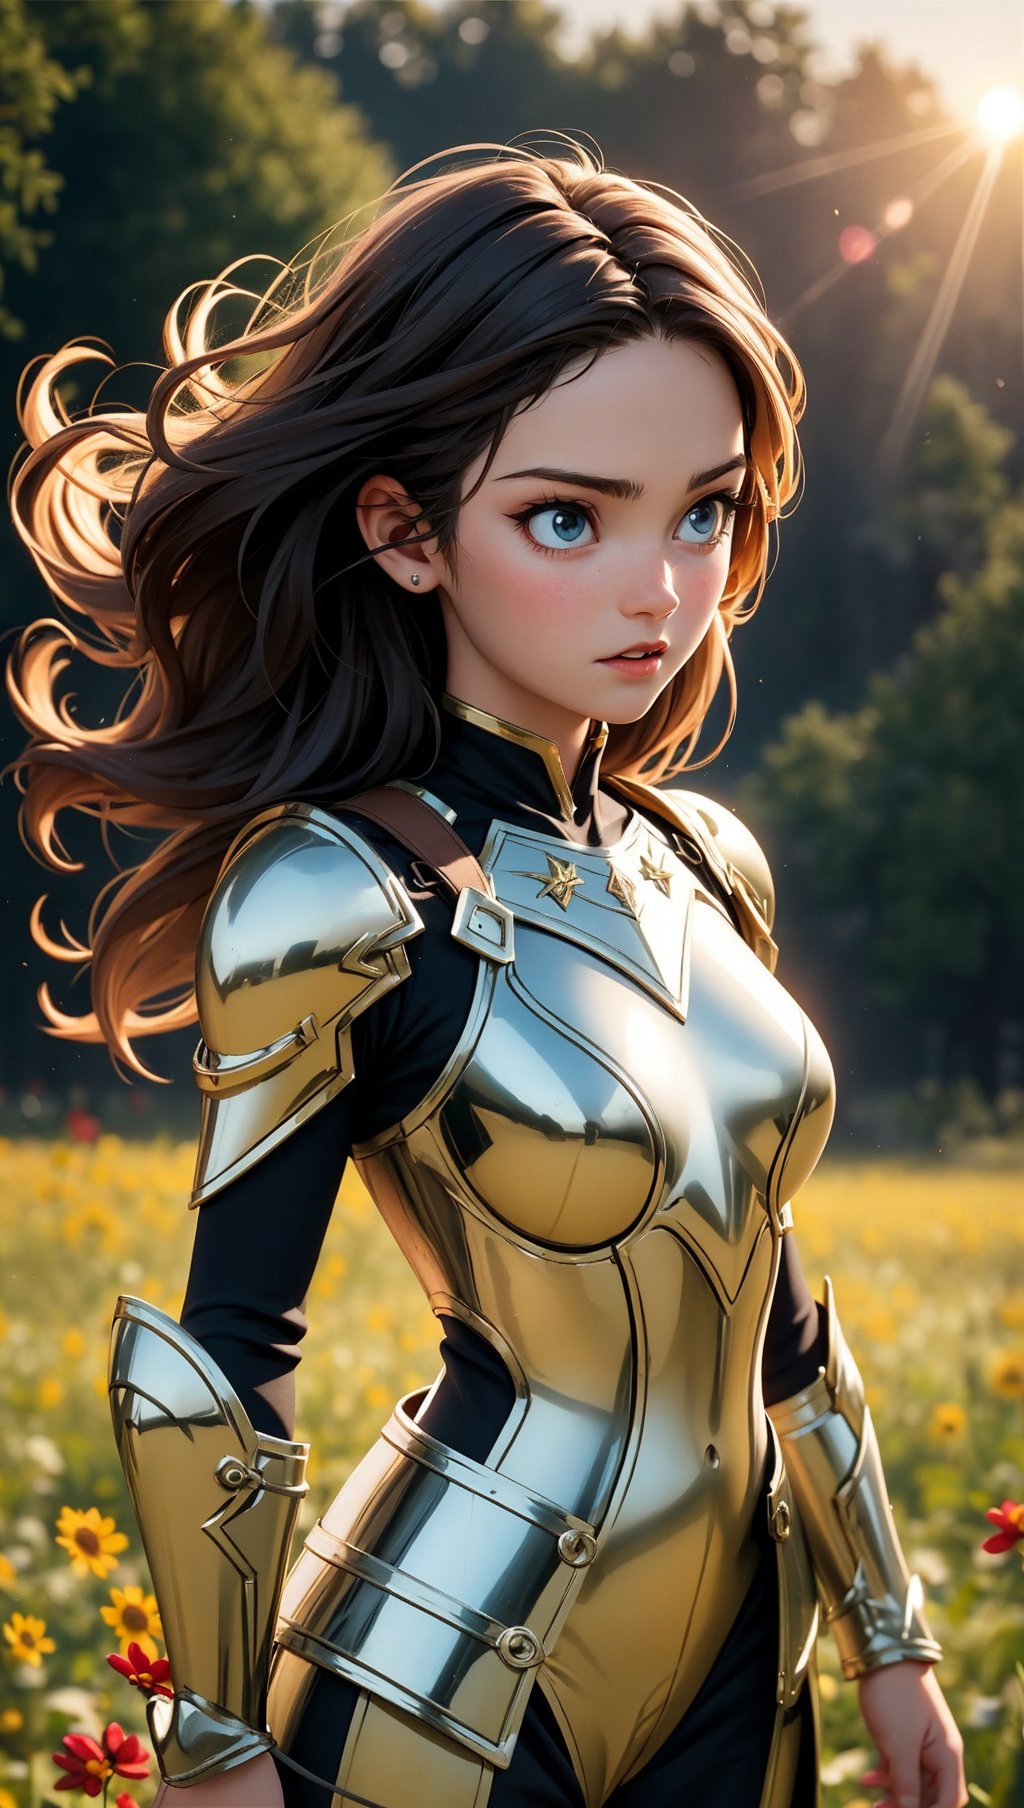 (masterpiece),(best quality),(extremely intricate),(sharp focus),(cinematic lighting),(extremely detailed),A young girl in armor,standing in a meadow of wildflowers. She is holding a sword. She has long brown hair adorned with wildflowers. Her expression is determined,and her eyes are shining with courage. The sun is shining brightly behind her,casting a golden glow over the scene.,flower4rmor,flower bodysuit,Flower,